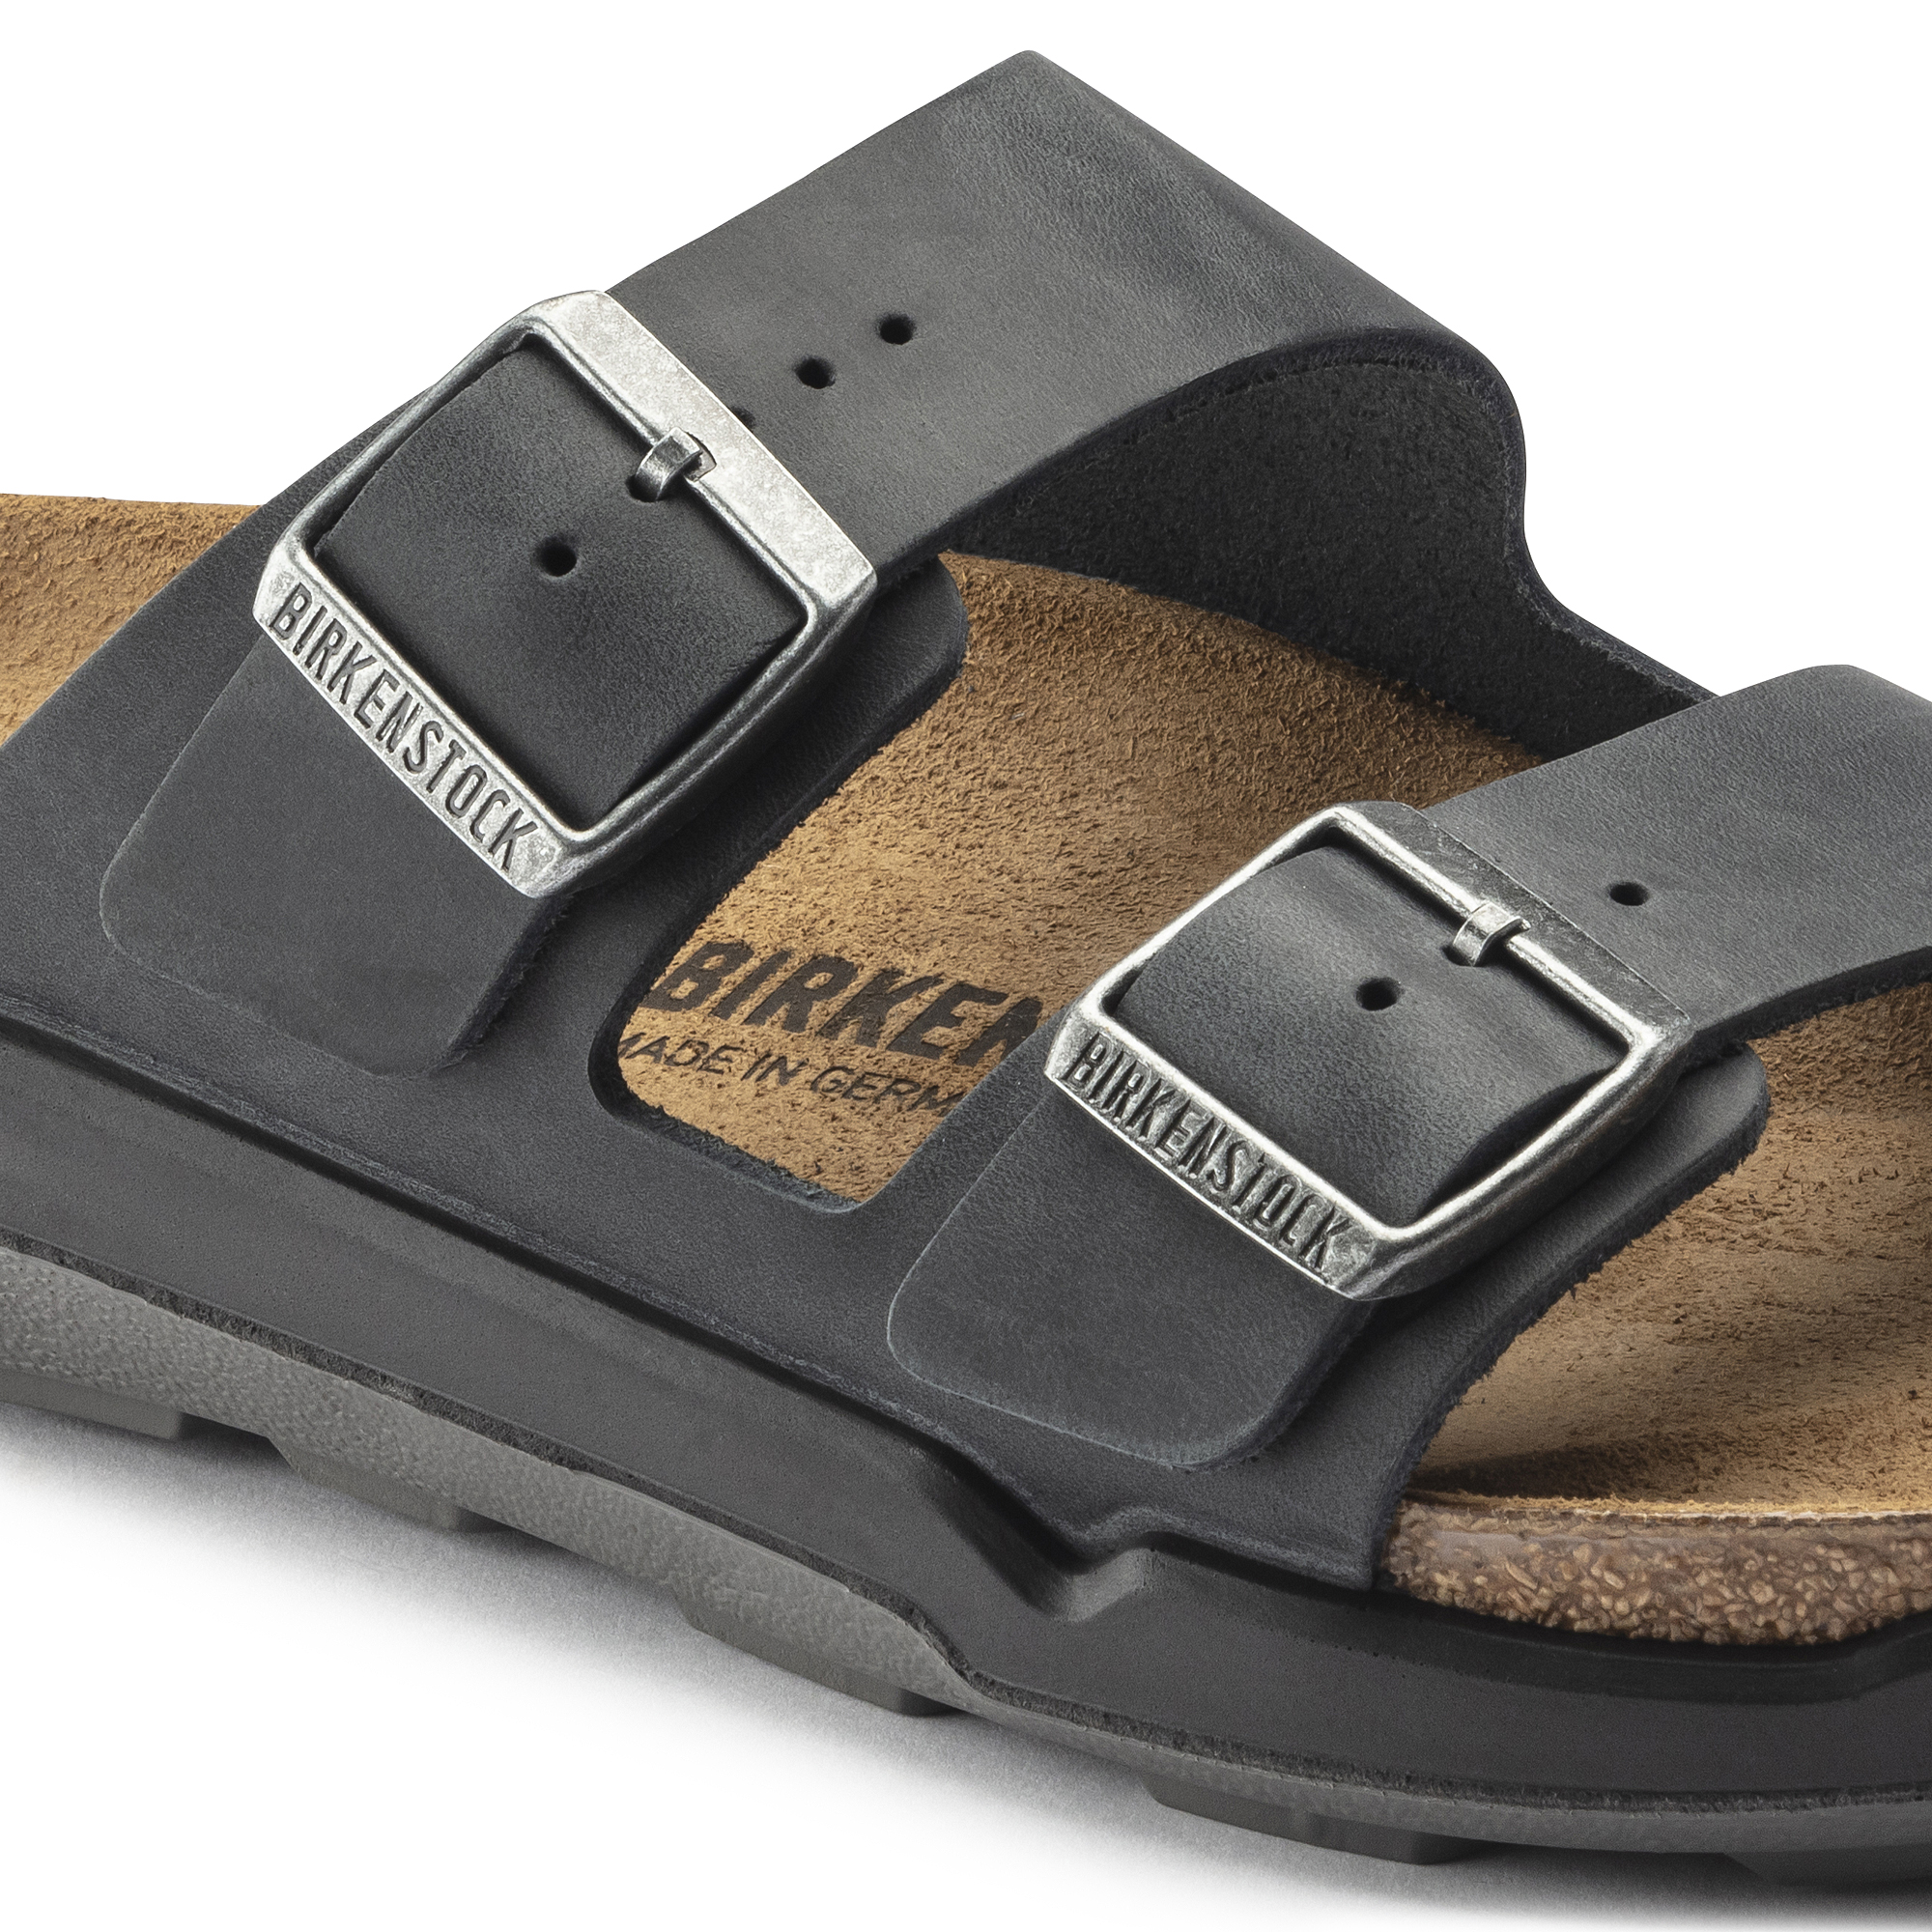 birkenstock buy now pay later